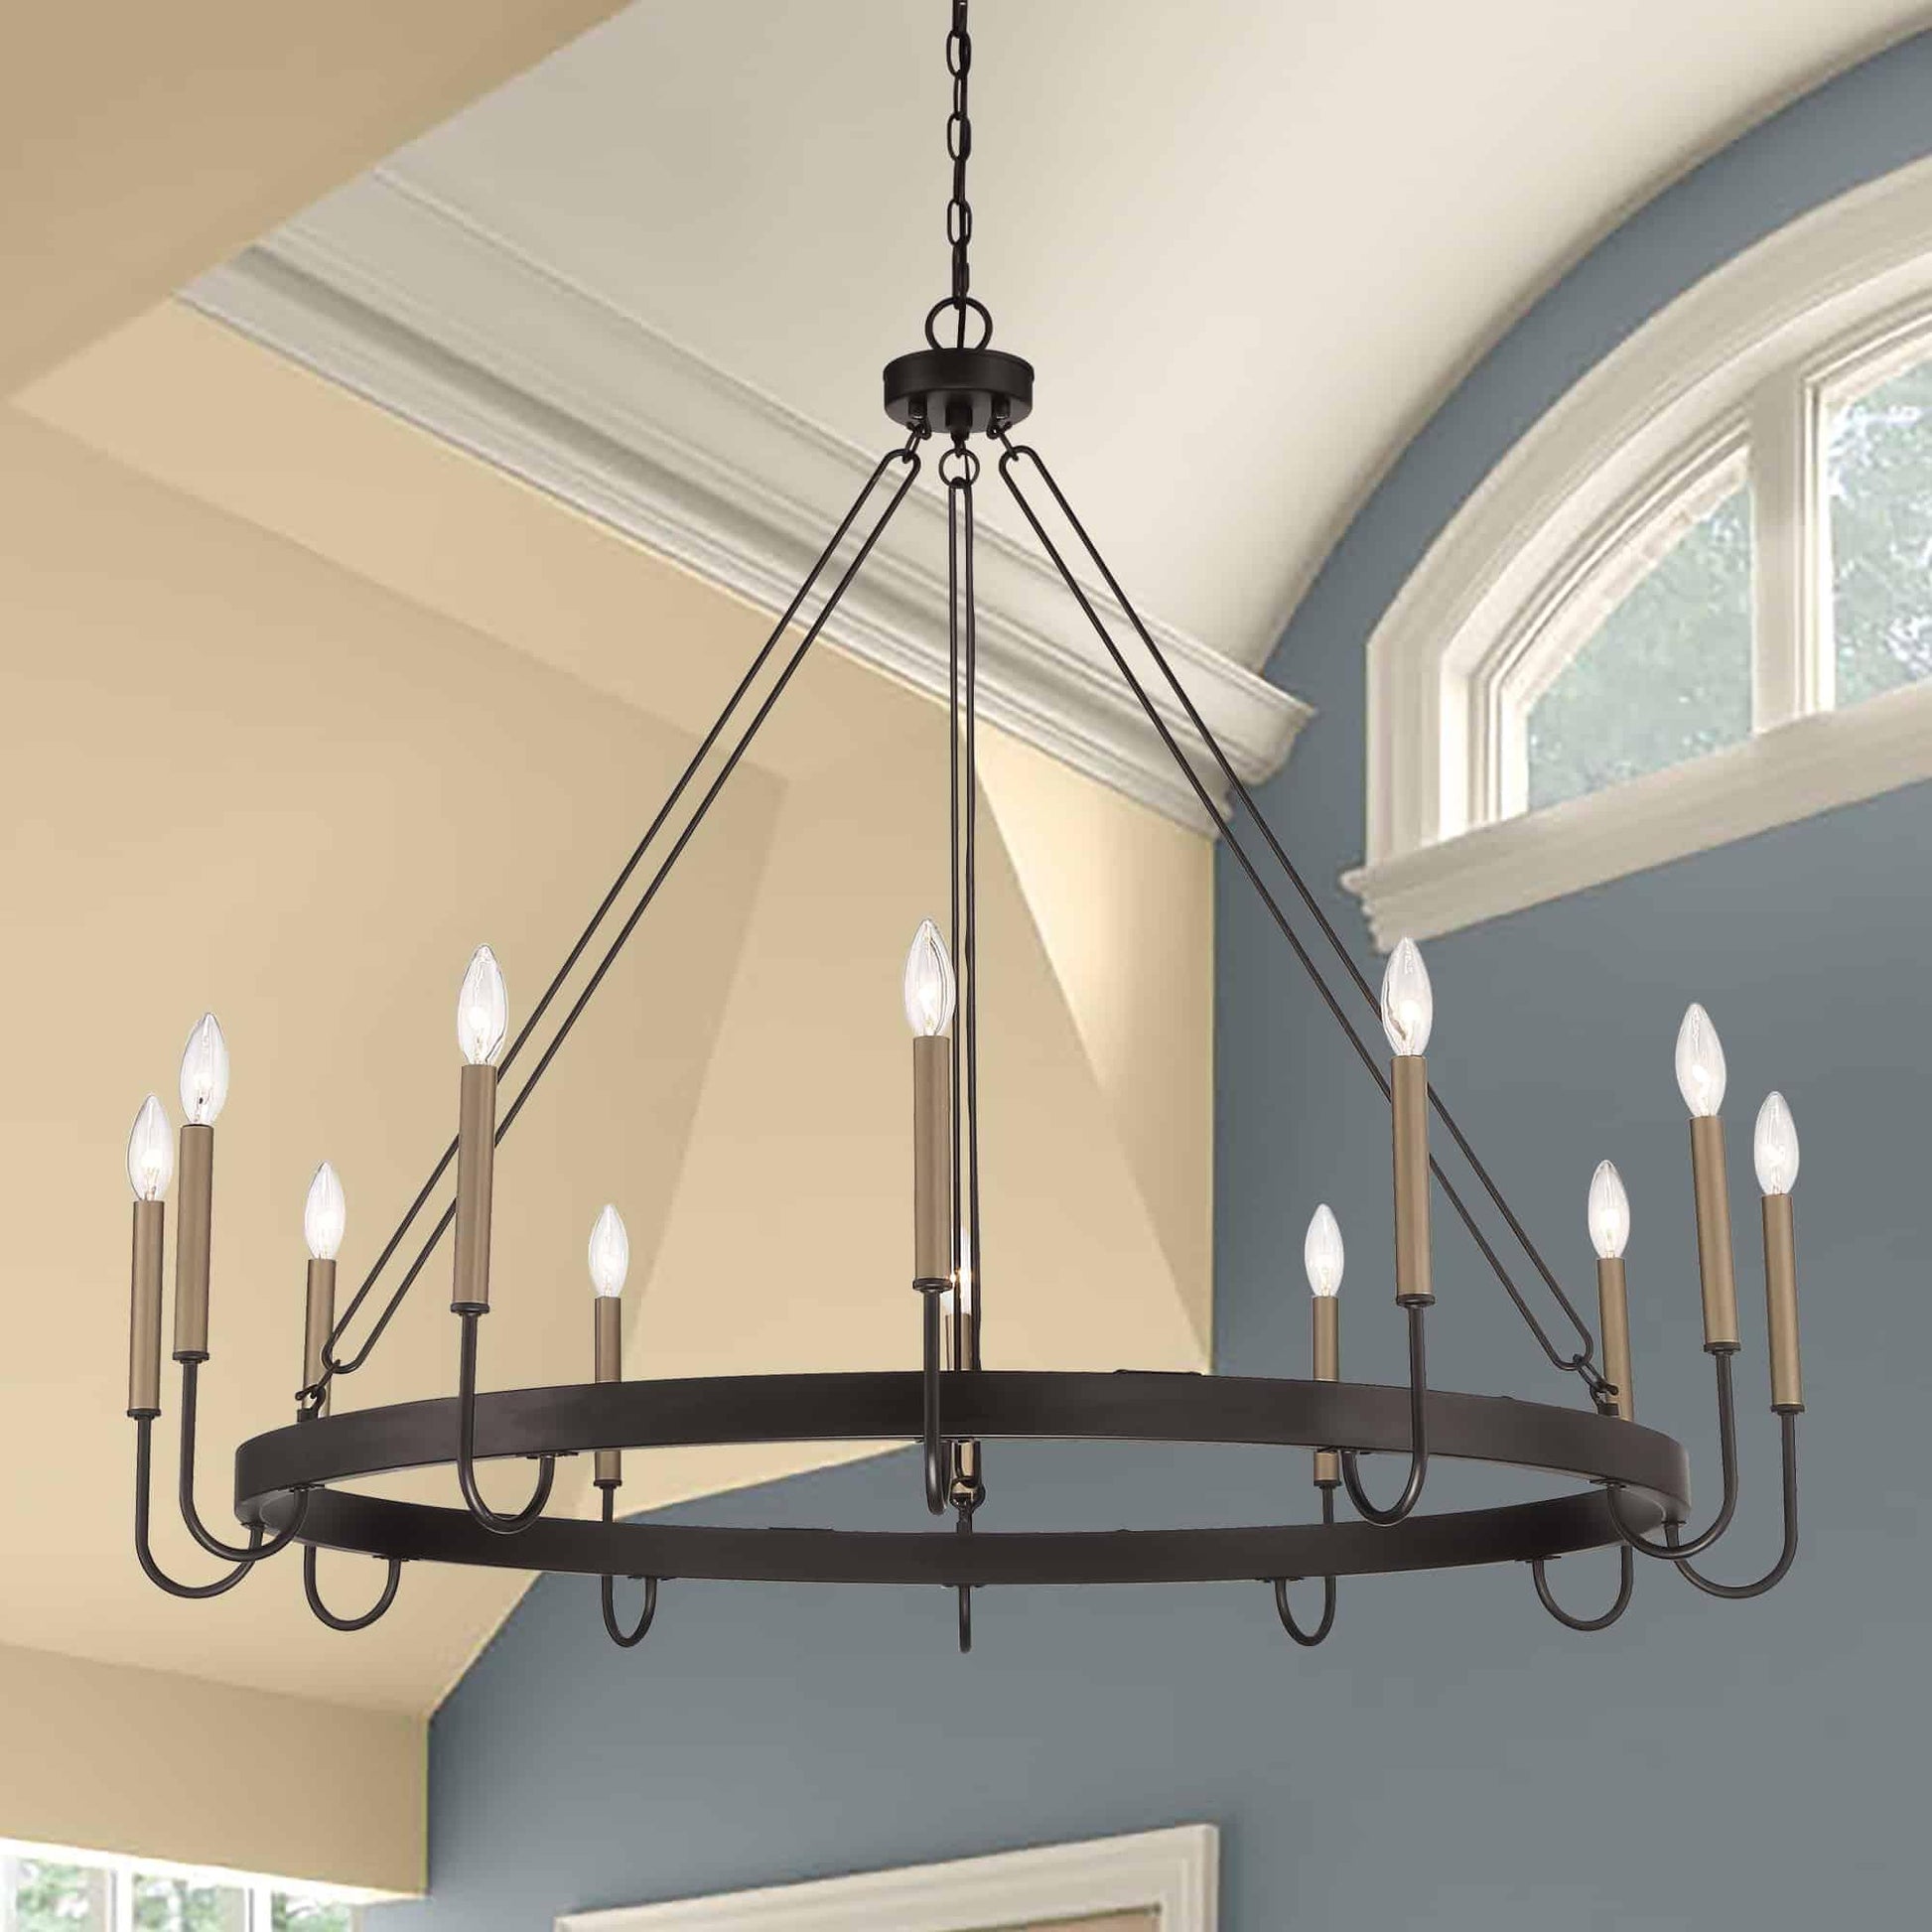 12 light candle style wagon wheel chain chandelier (30) by ACROMA